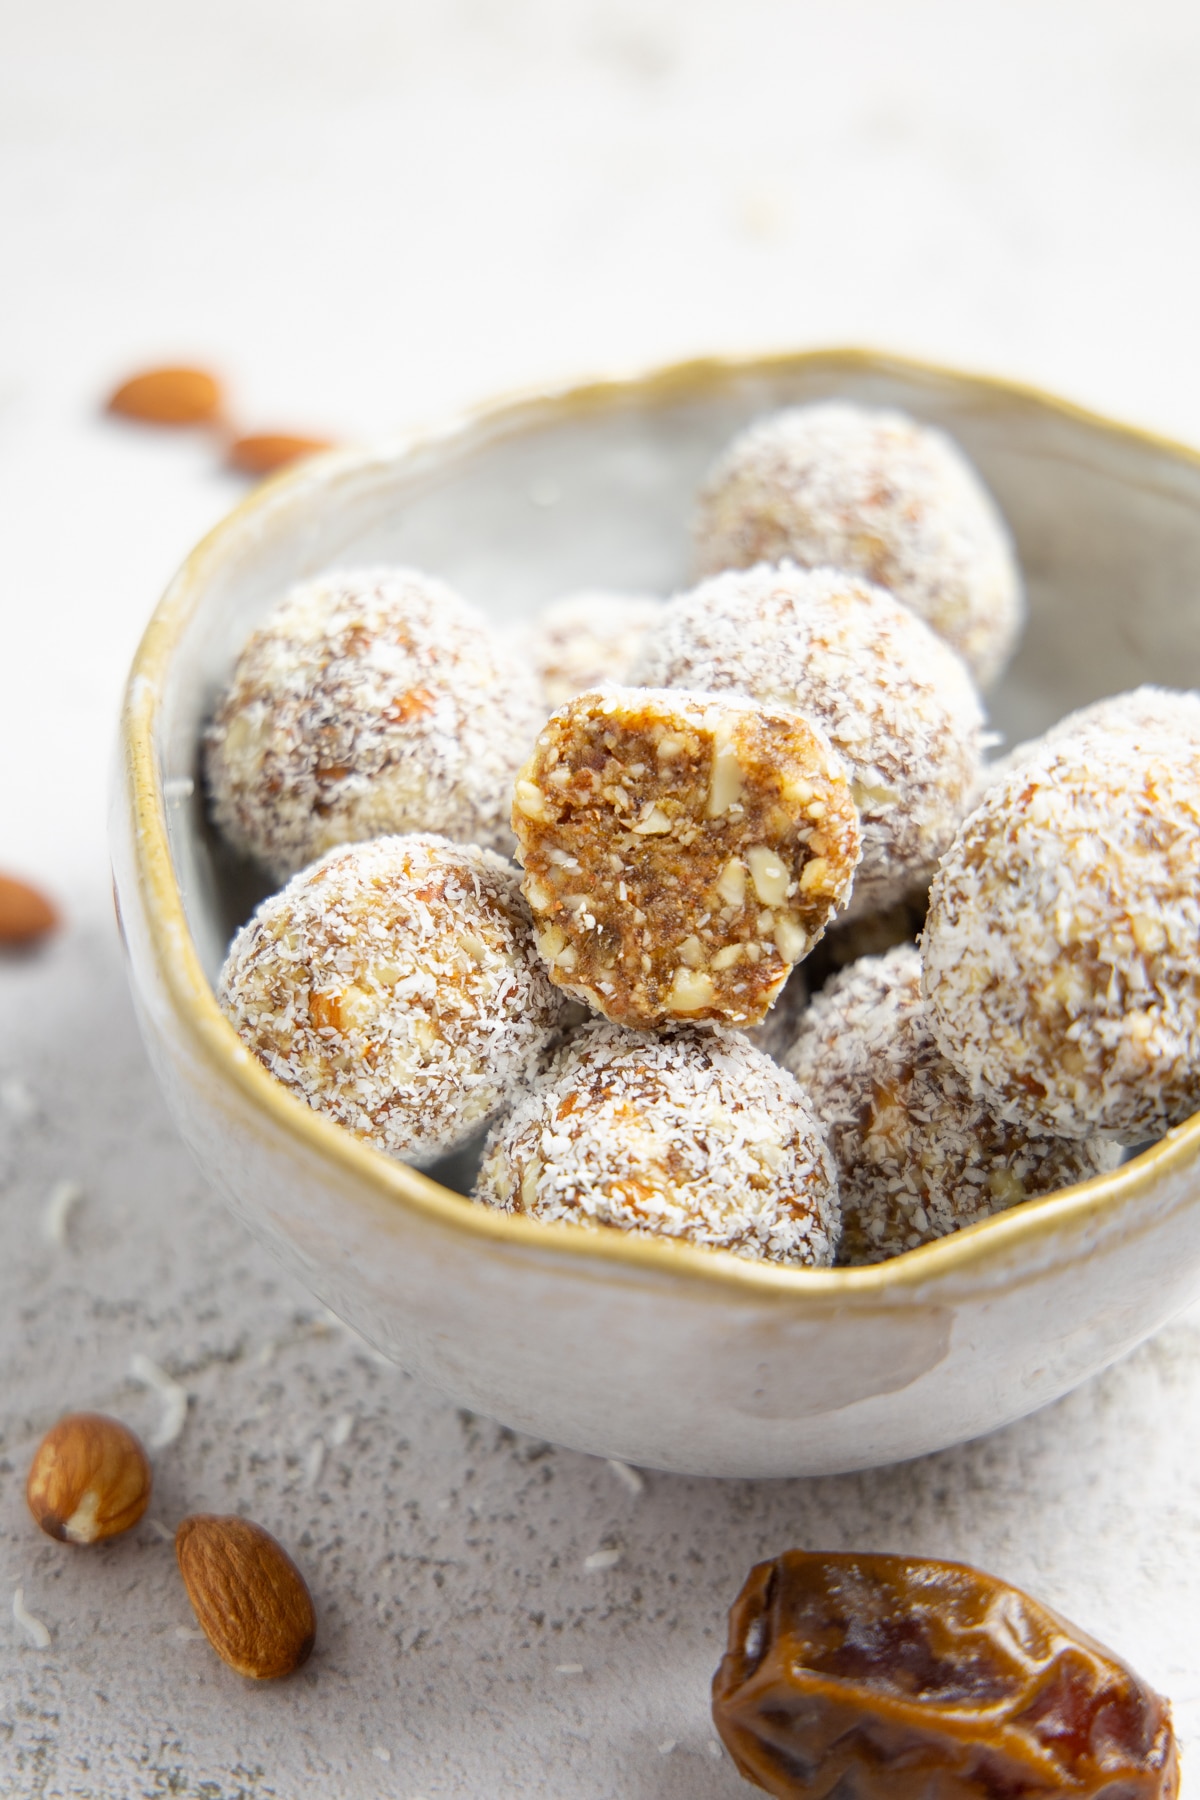 The salted caramel bliss balls in a bowl.